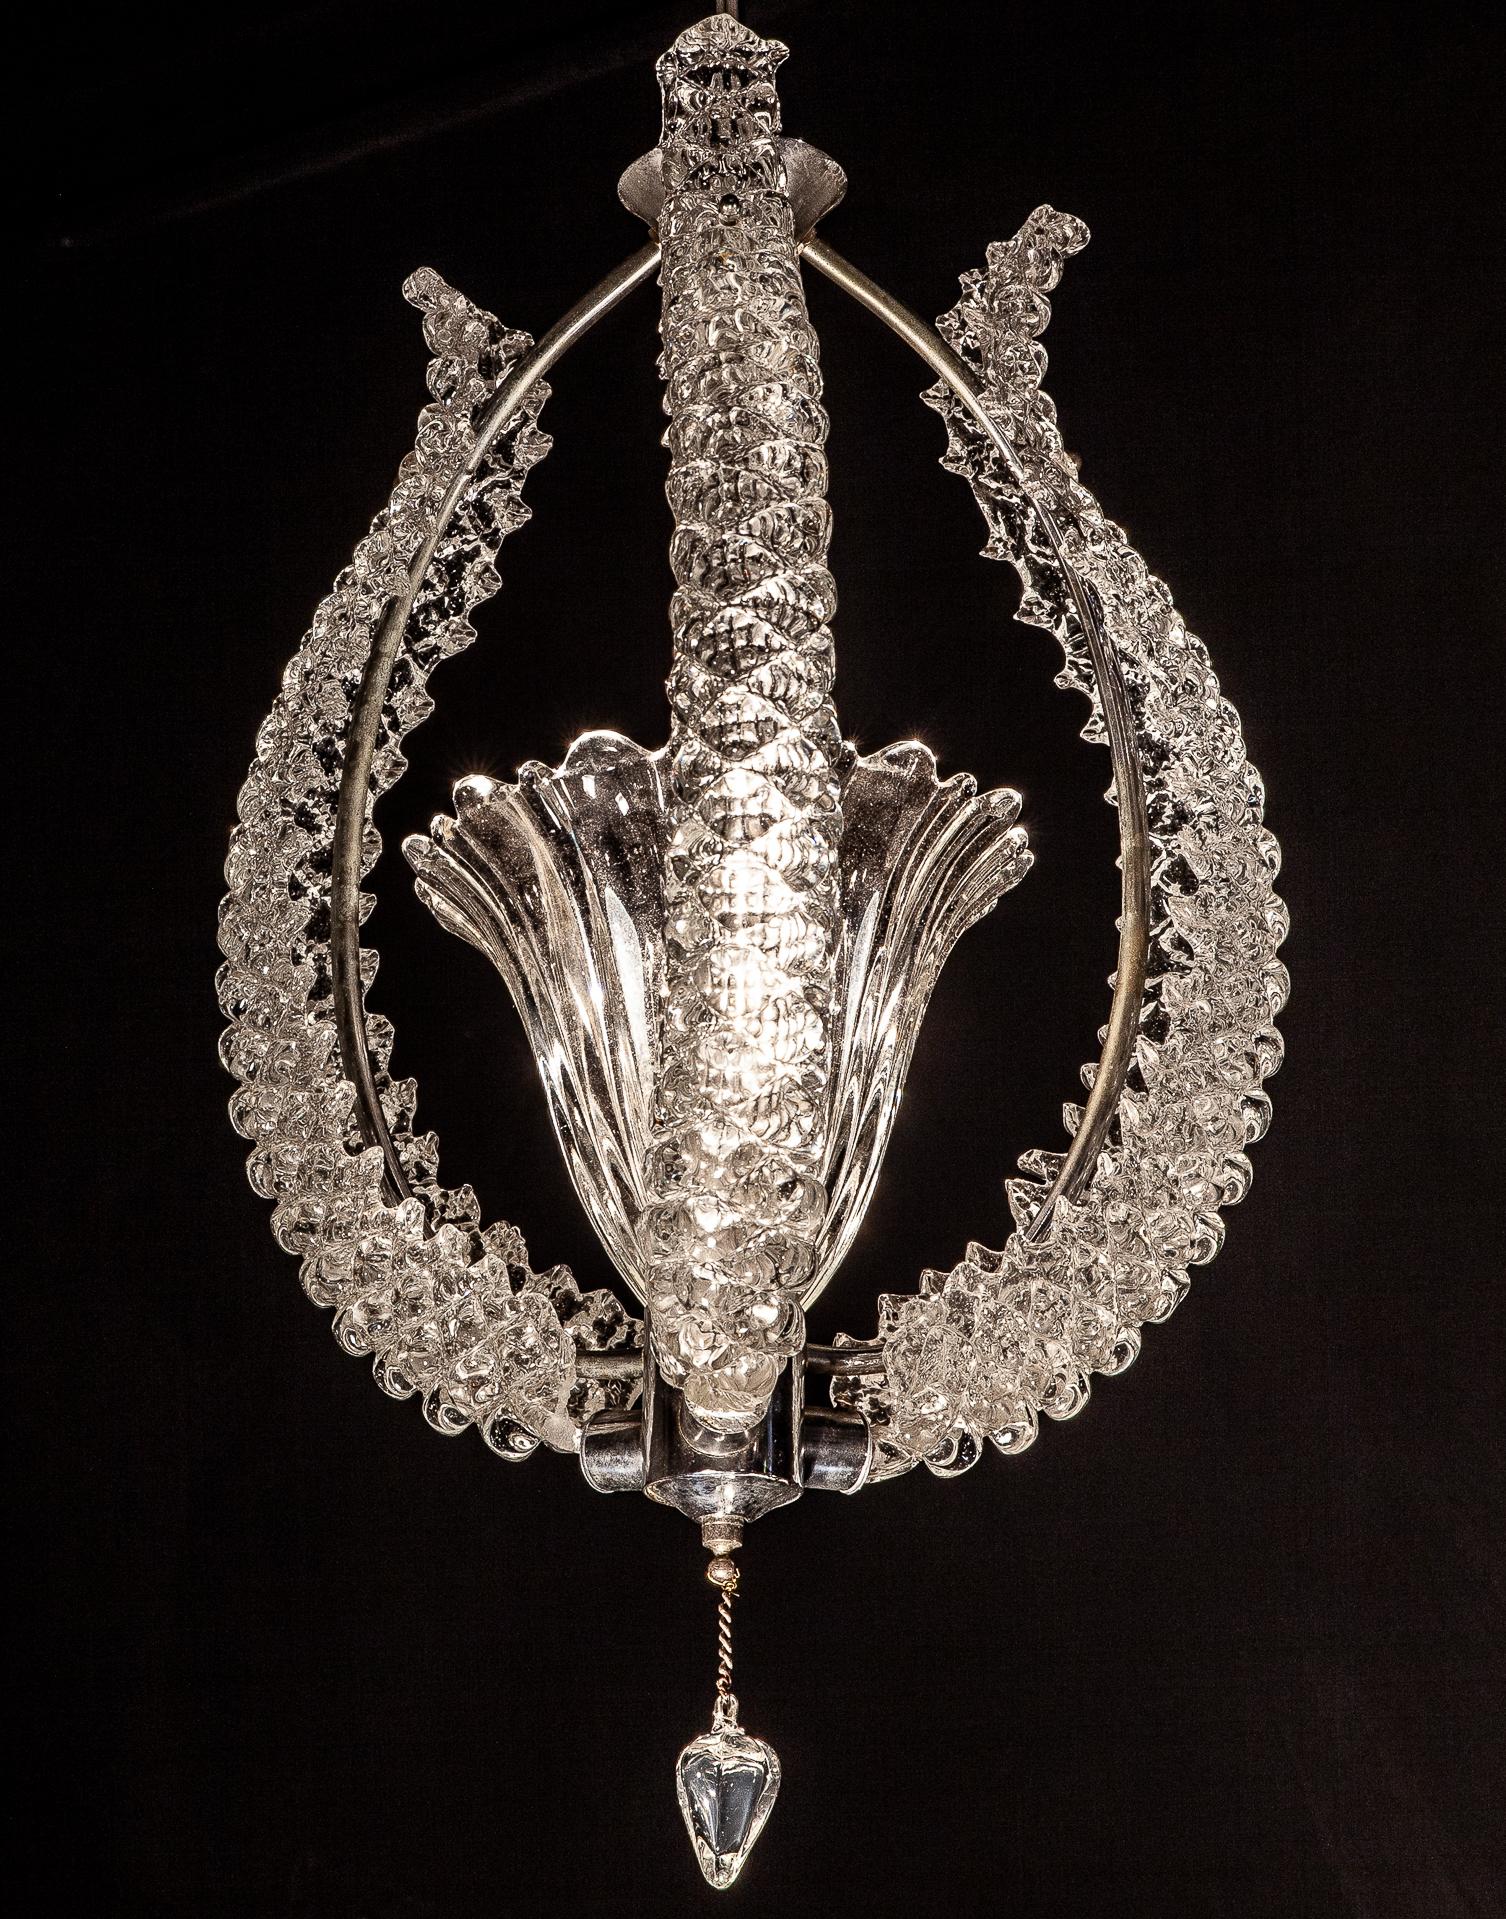 Midcentury Murano Glass Elegant Chandelier by Ercole Barovier, 1940s For Sale 5